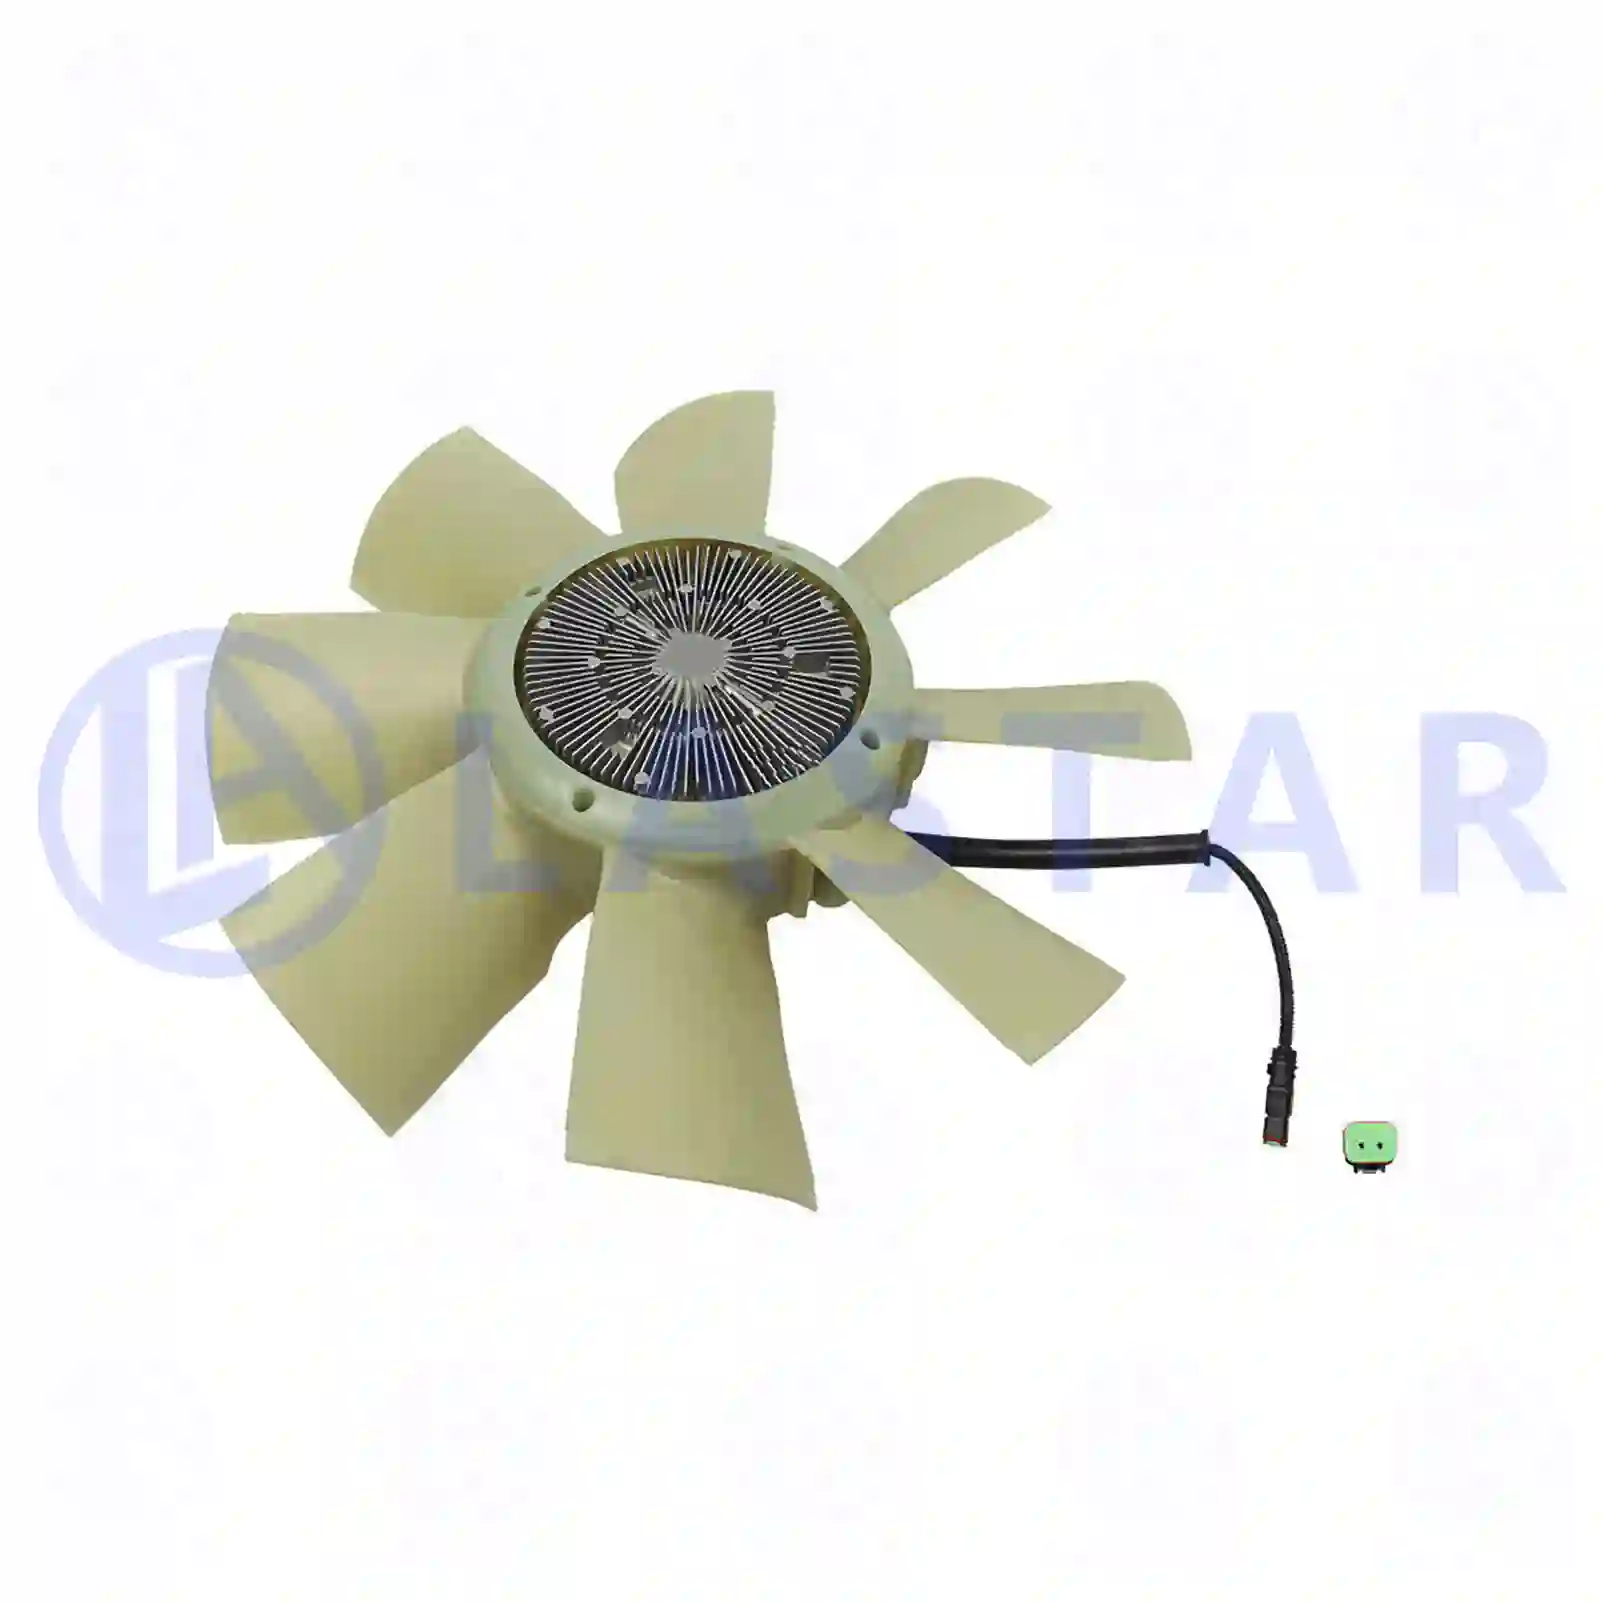 Fan with clutch, 77709784, 1453968, 2052007, ZG00394-0008 ||  77709784 Lastar Spare Part | Truck Spare Parts, Auotomotive Spare Parts Fan with clutch, 77709784, 1453968, 2052007, ZG00394-0008 ||  77709784 Lastar Spare Part | Truck Spare Parts, Auotomotive Spare Parts